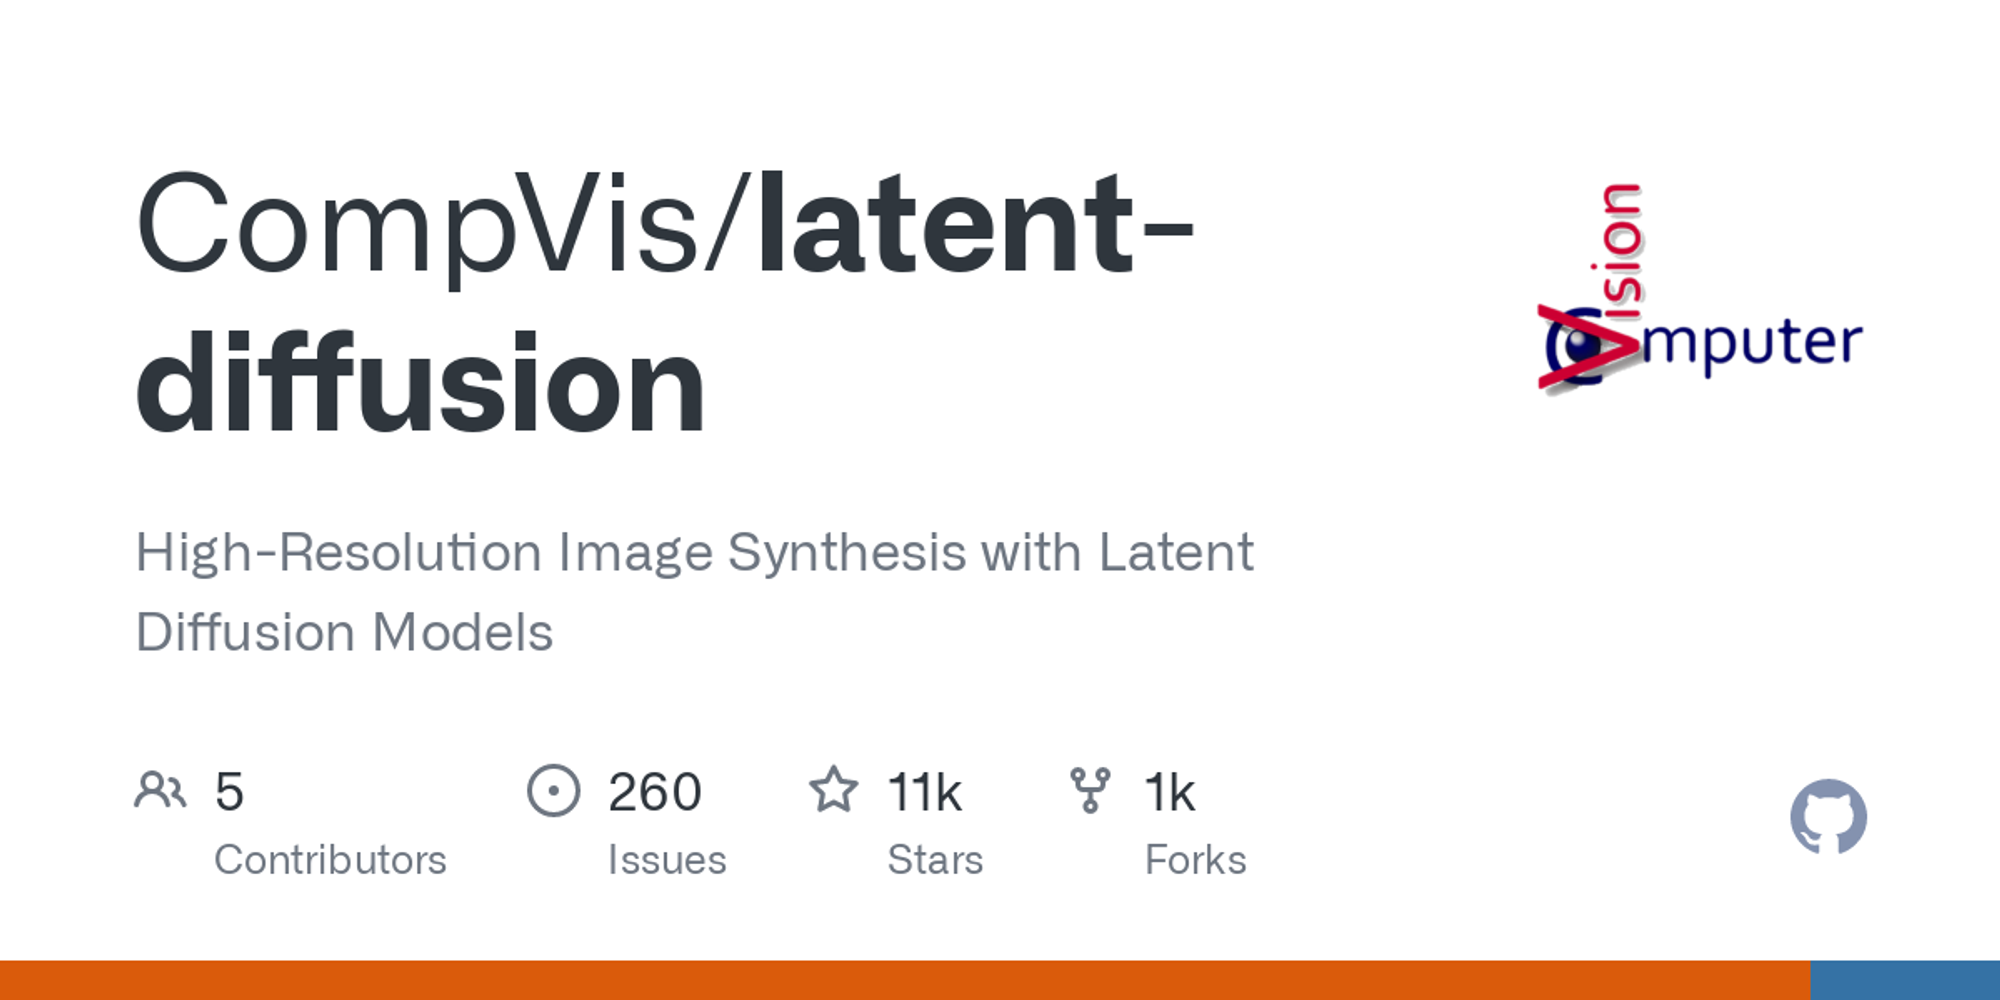 GitHub - CompVis/latent-diffusion: High-Resolution Image Synthesis with Latent Diffusion Models